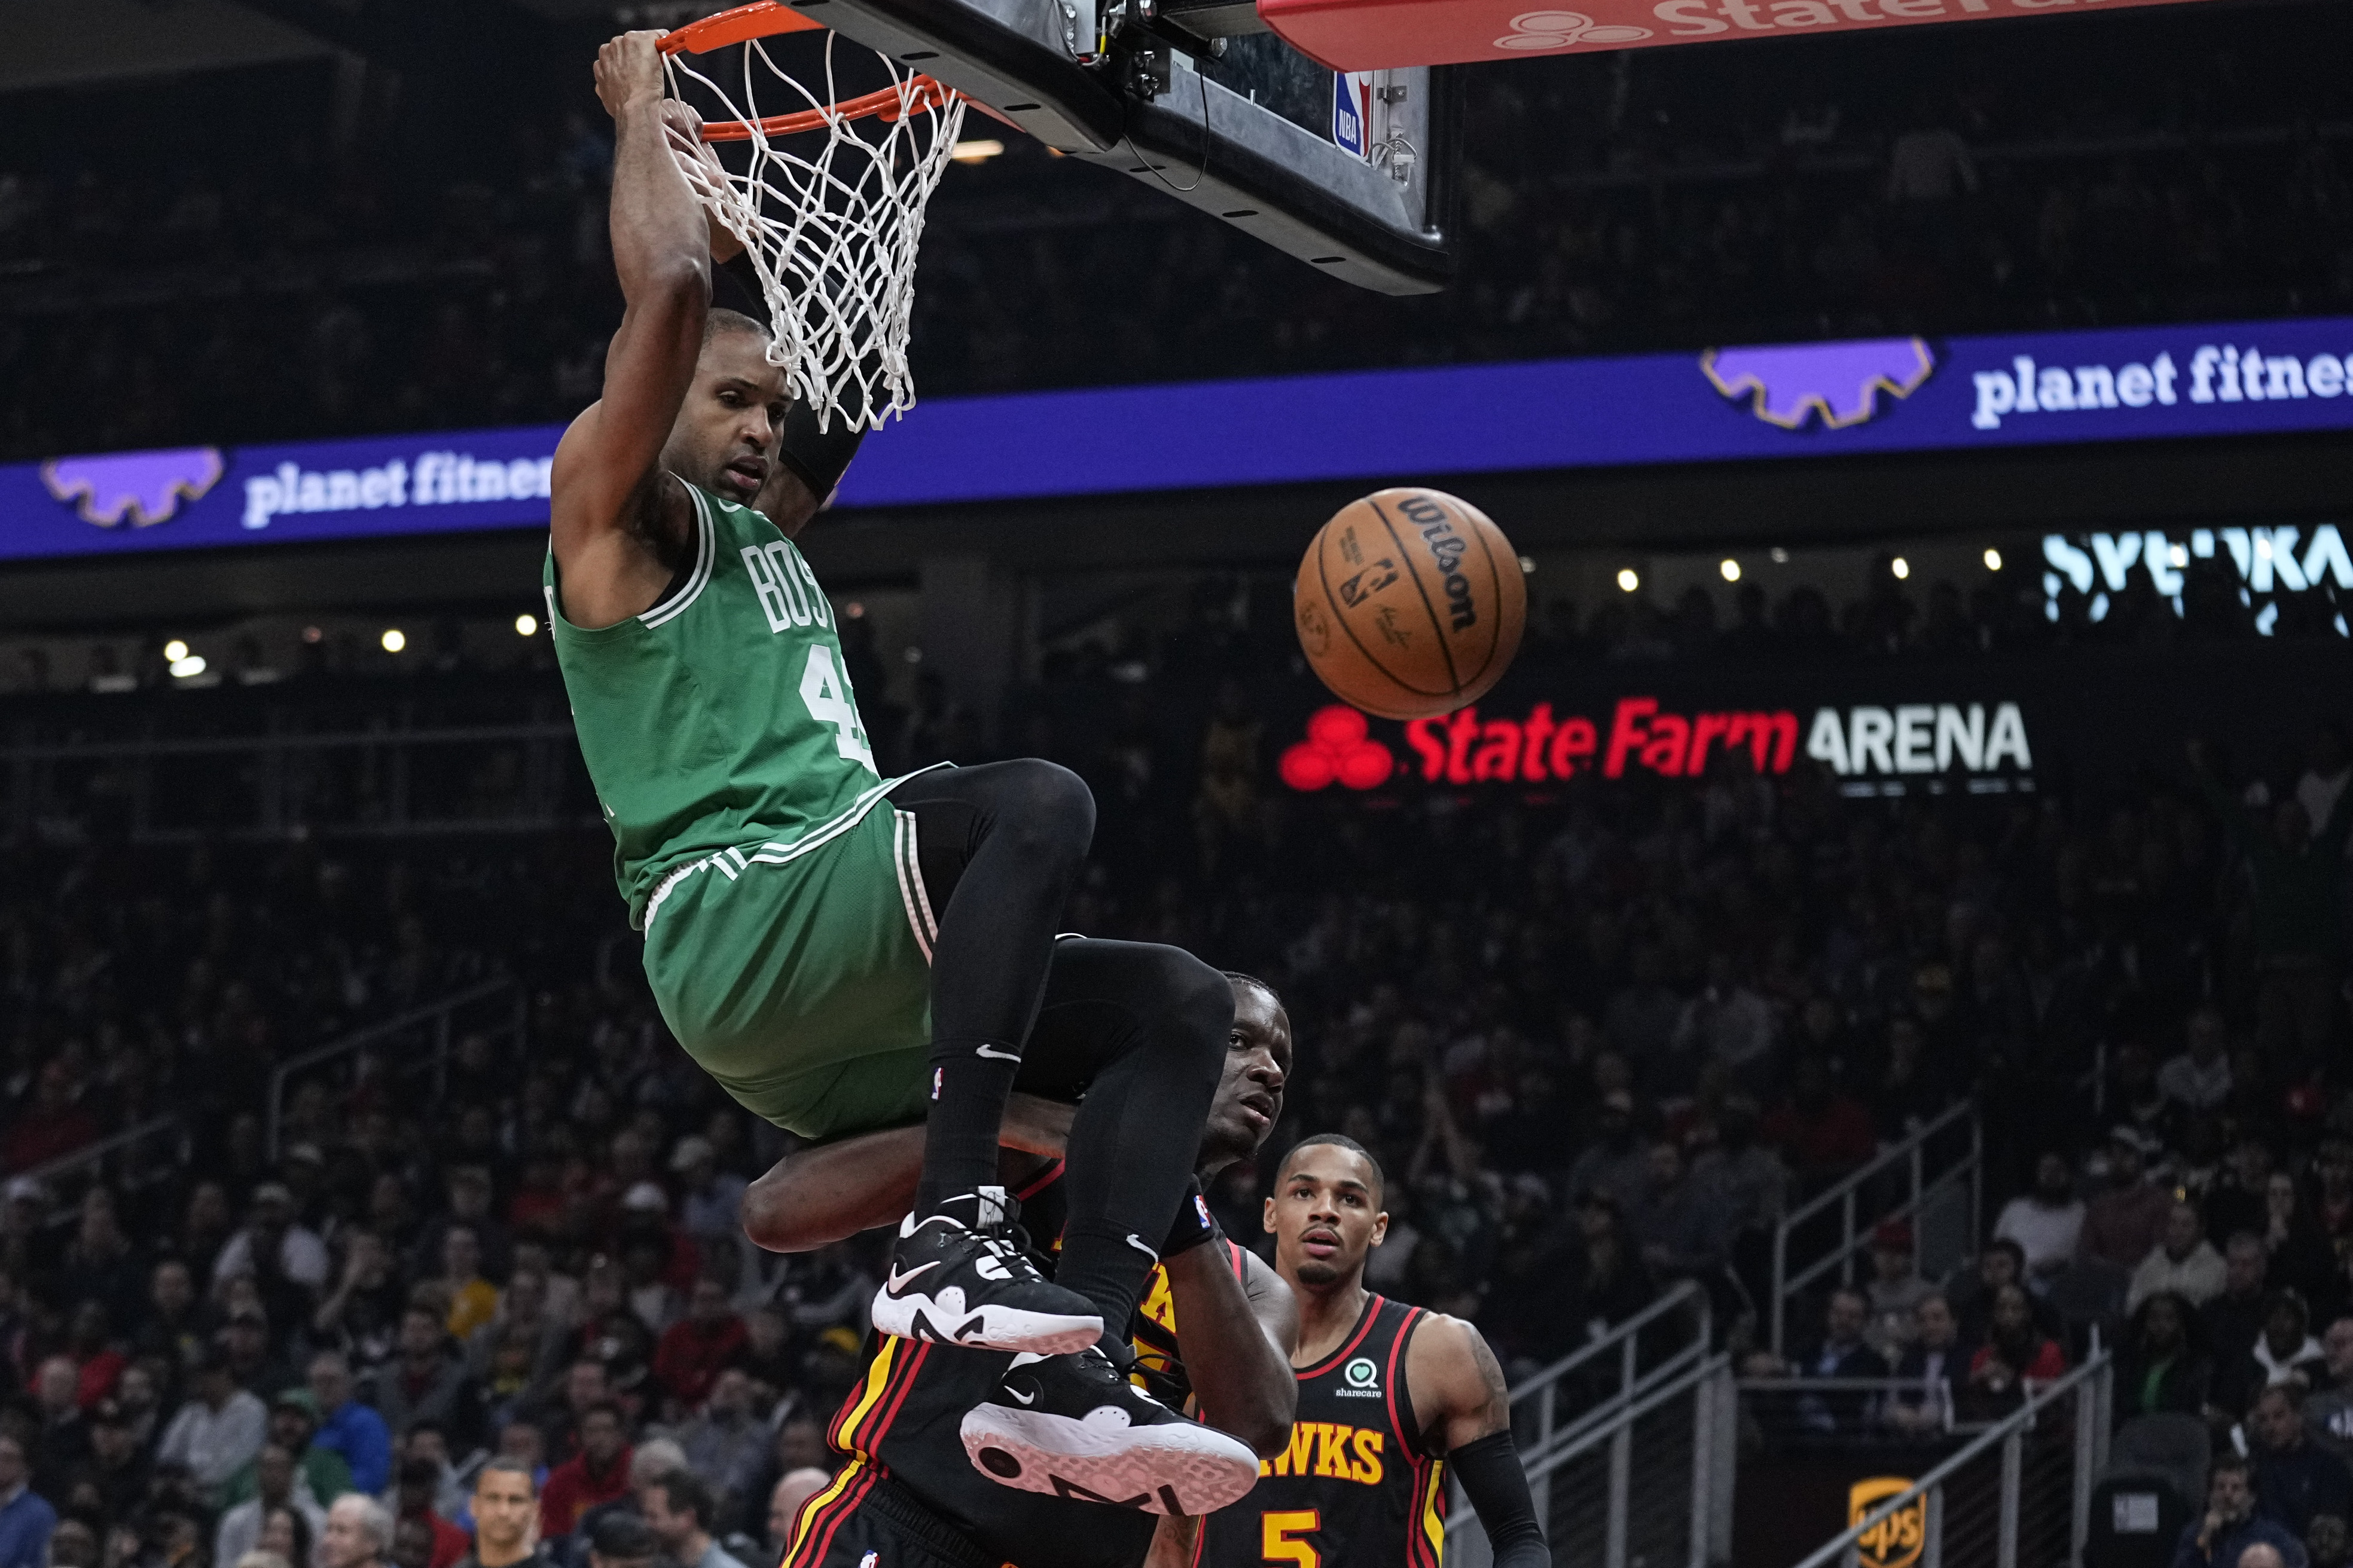 Al Horford has done a little bit of everything for the Celtics